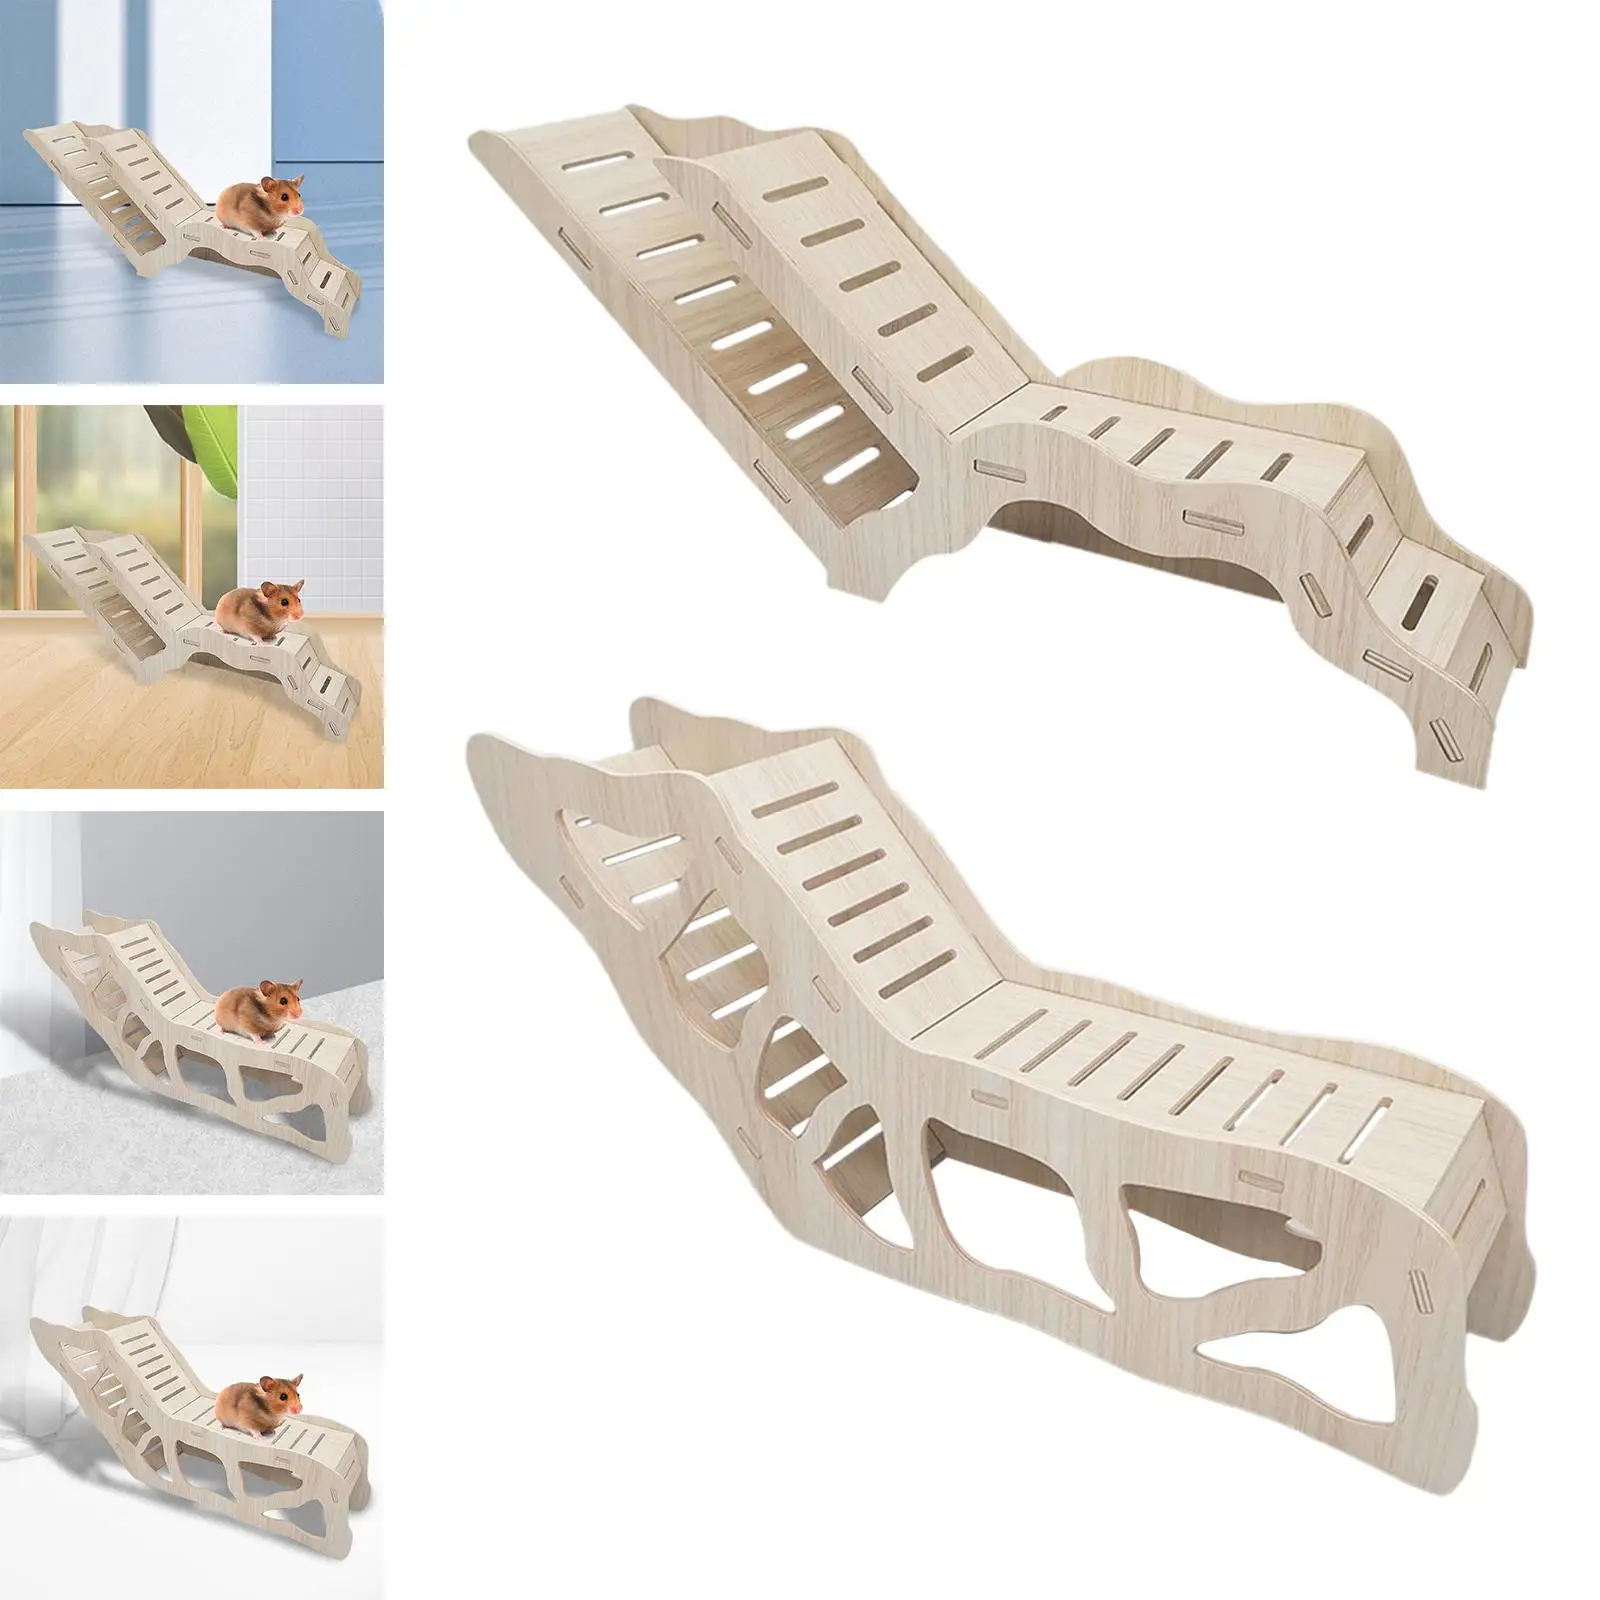 Hamster Climbing Toy Wooden Ladder Climbing Toy Dwarf Mice Hamster House Hideouts Hamster Habitat Syrian Hamster for Small Pets